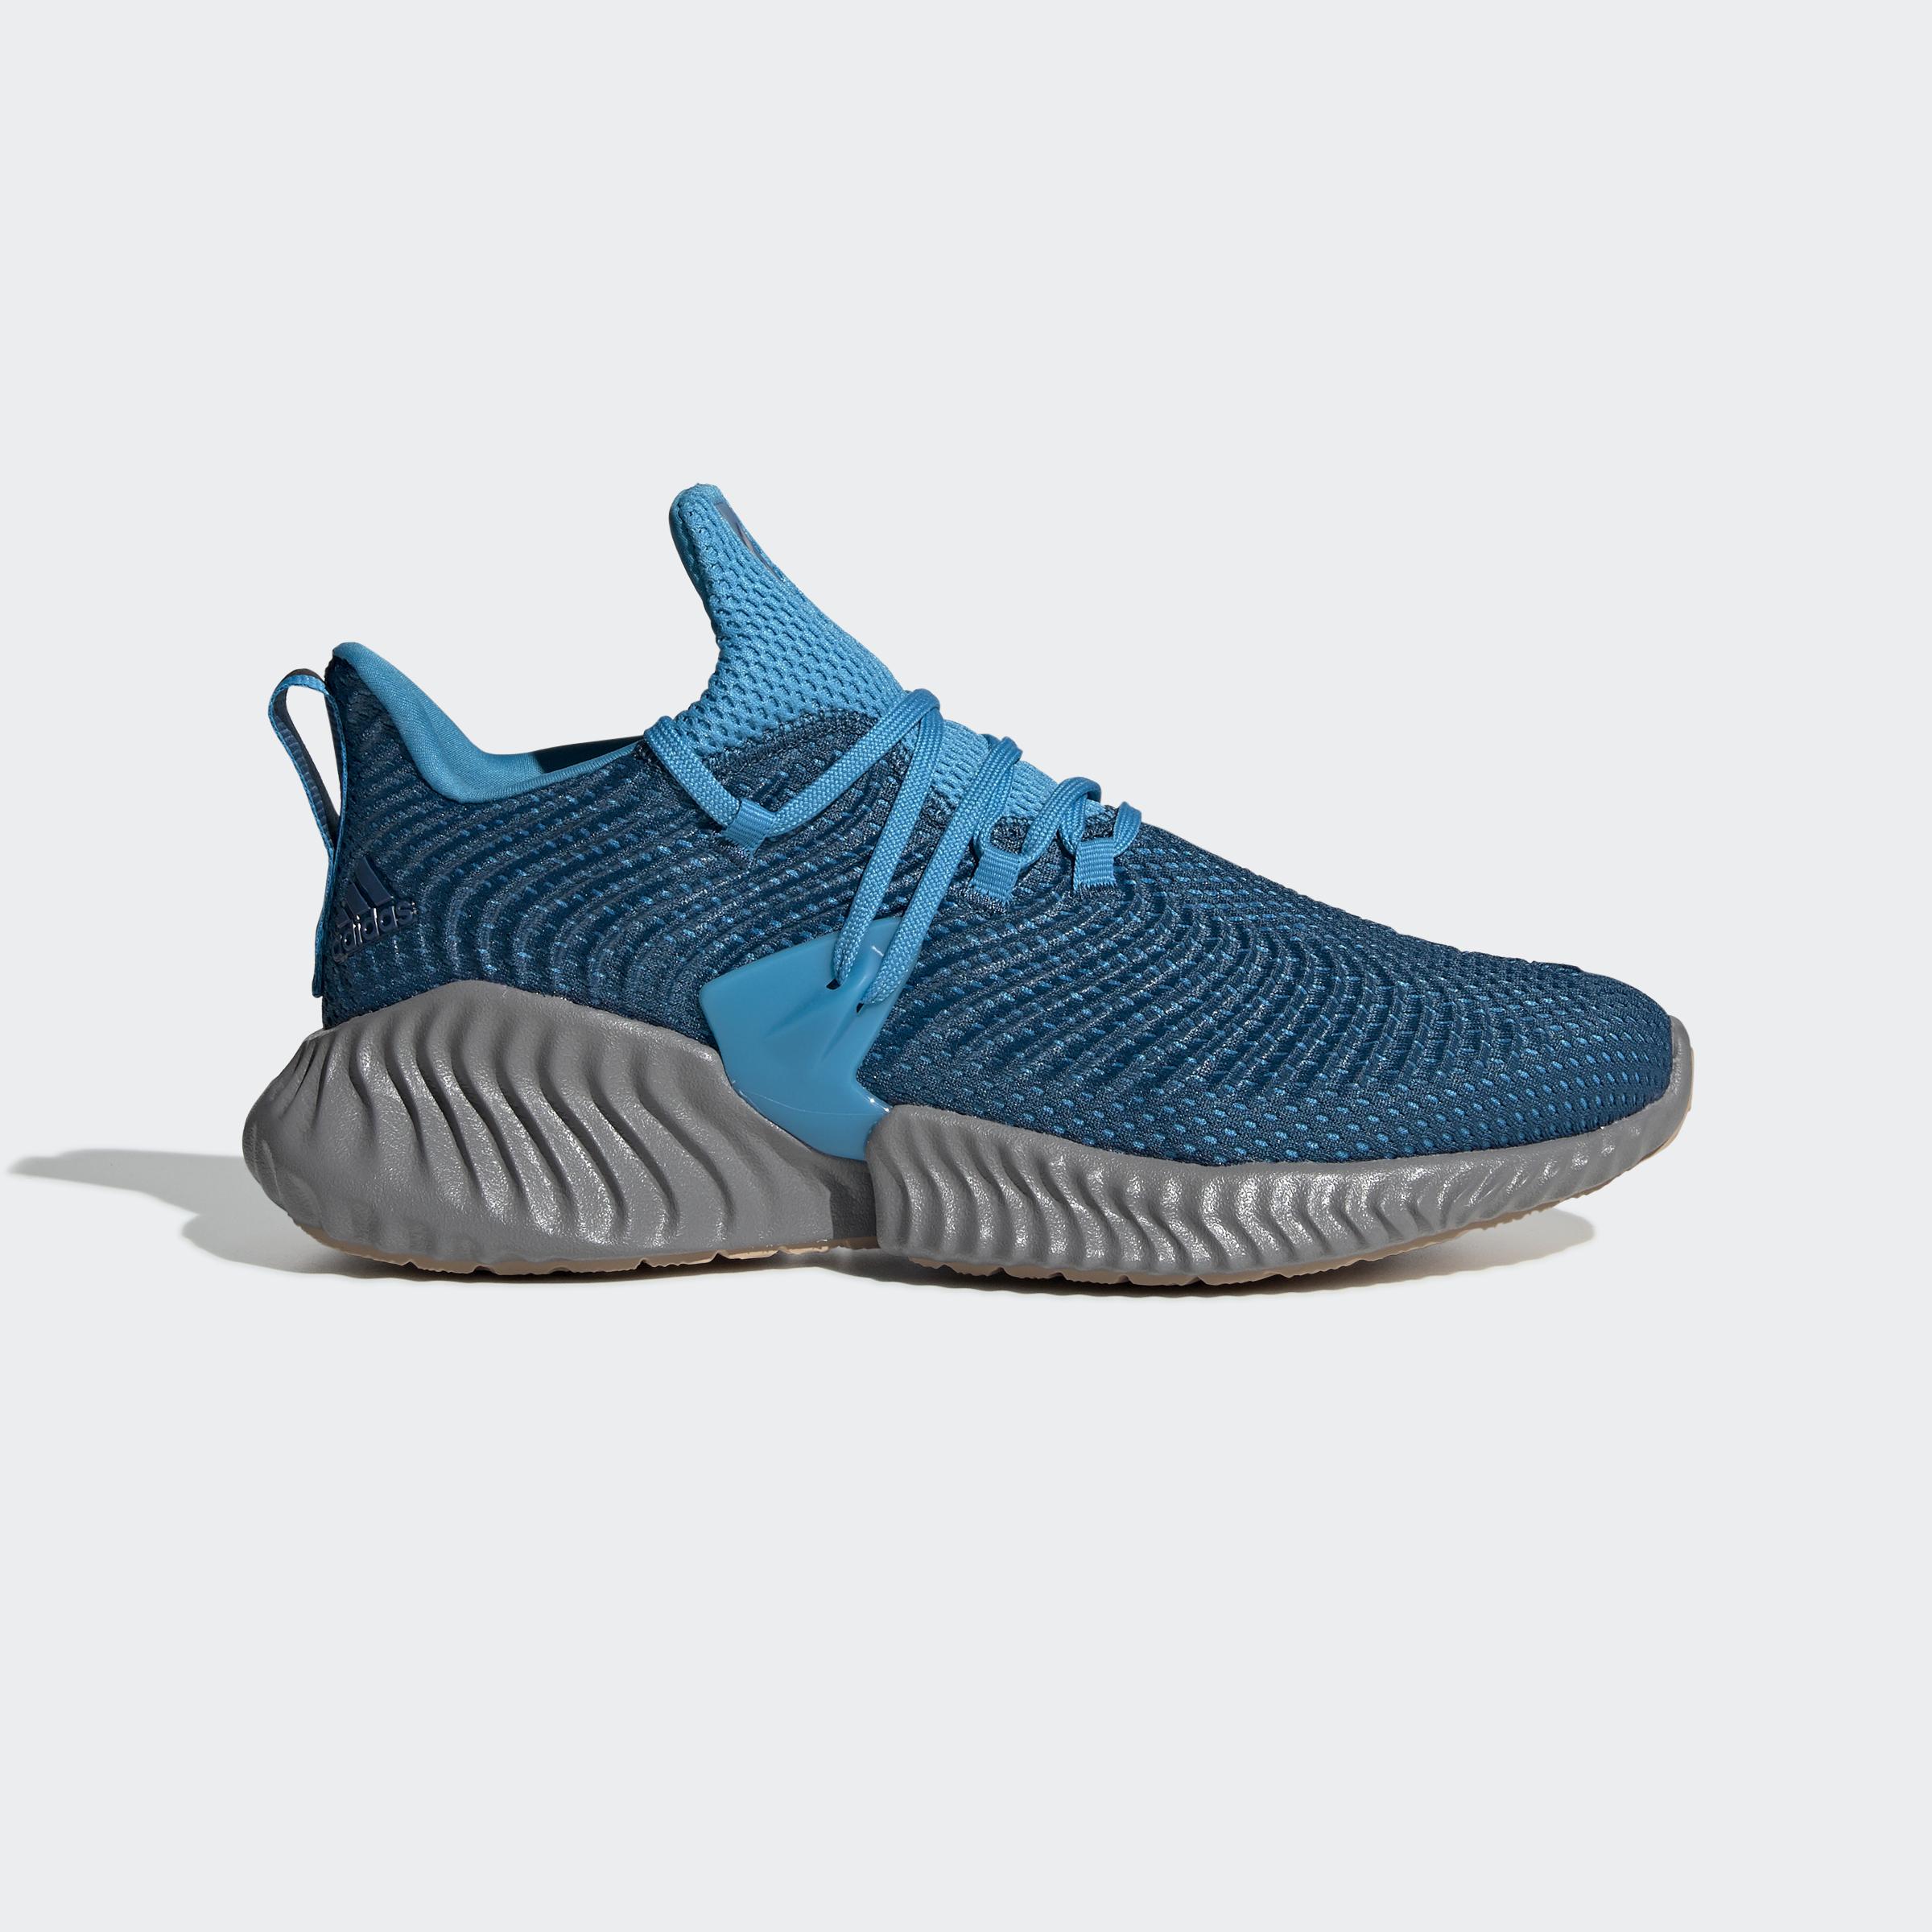 adidas Alphabounce Instinct Shoes in Blue for Men - Lyst